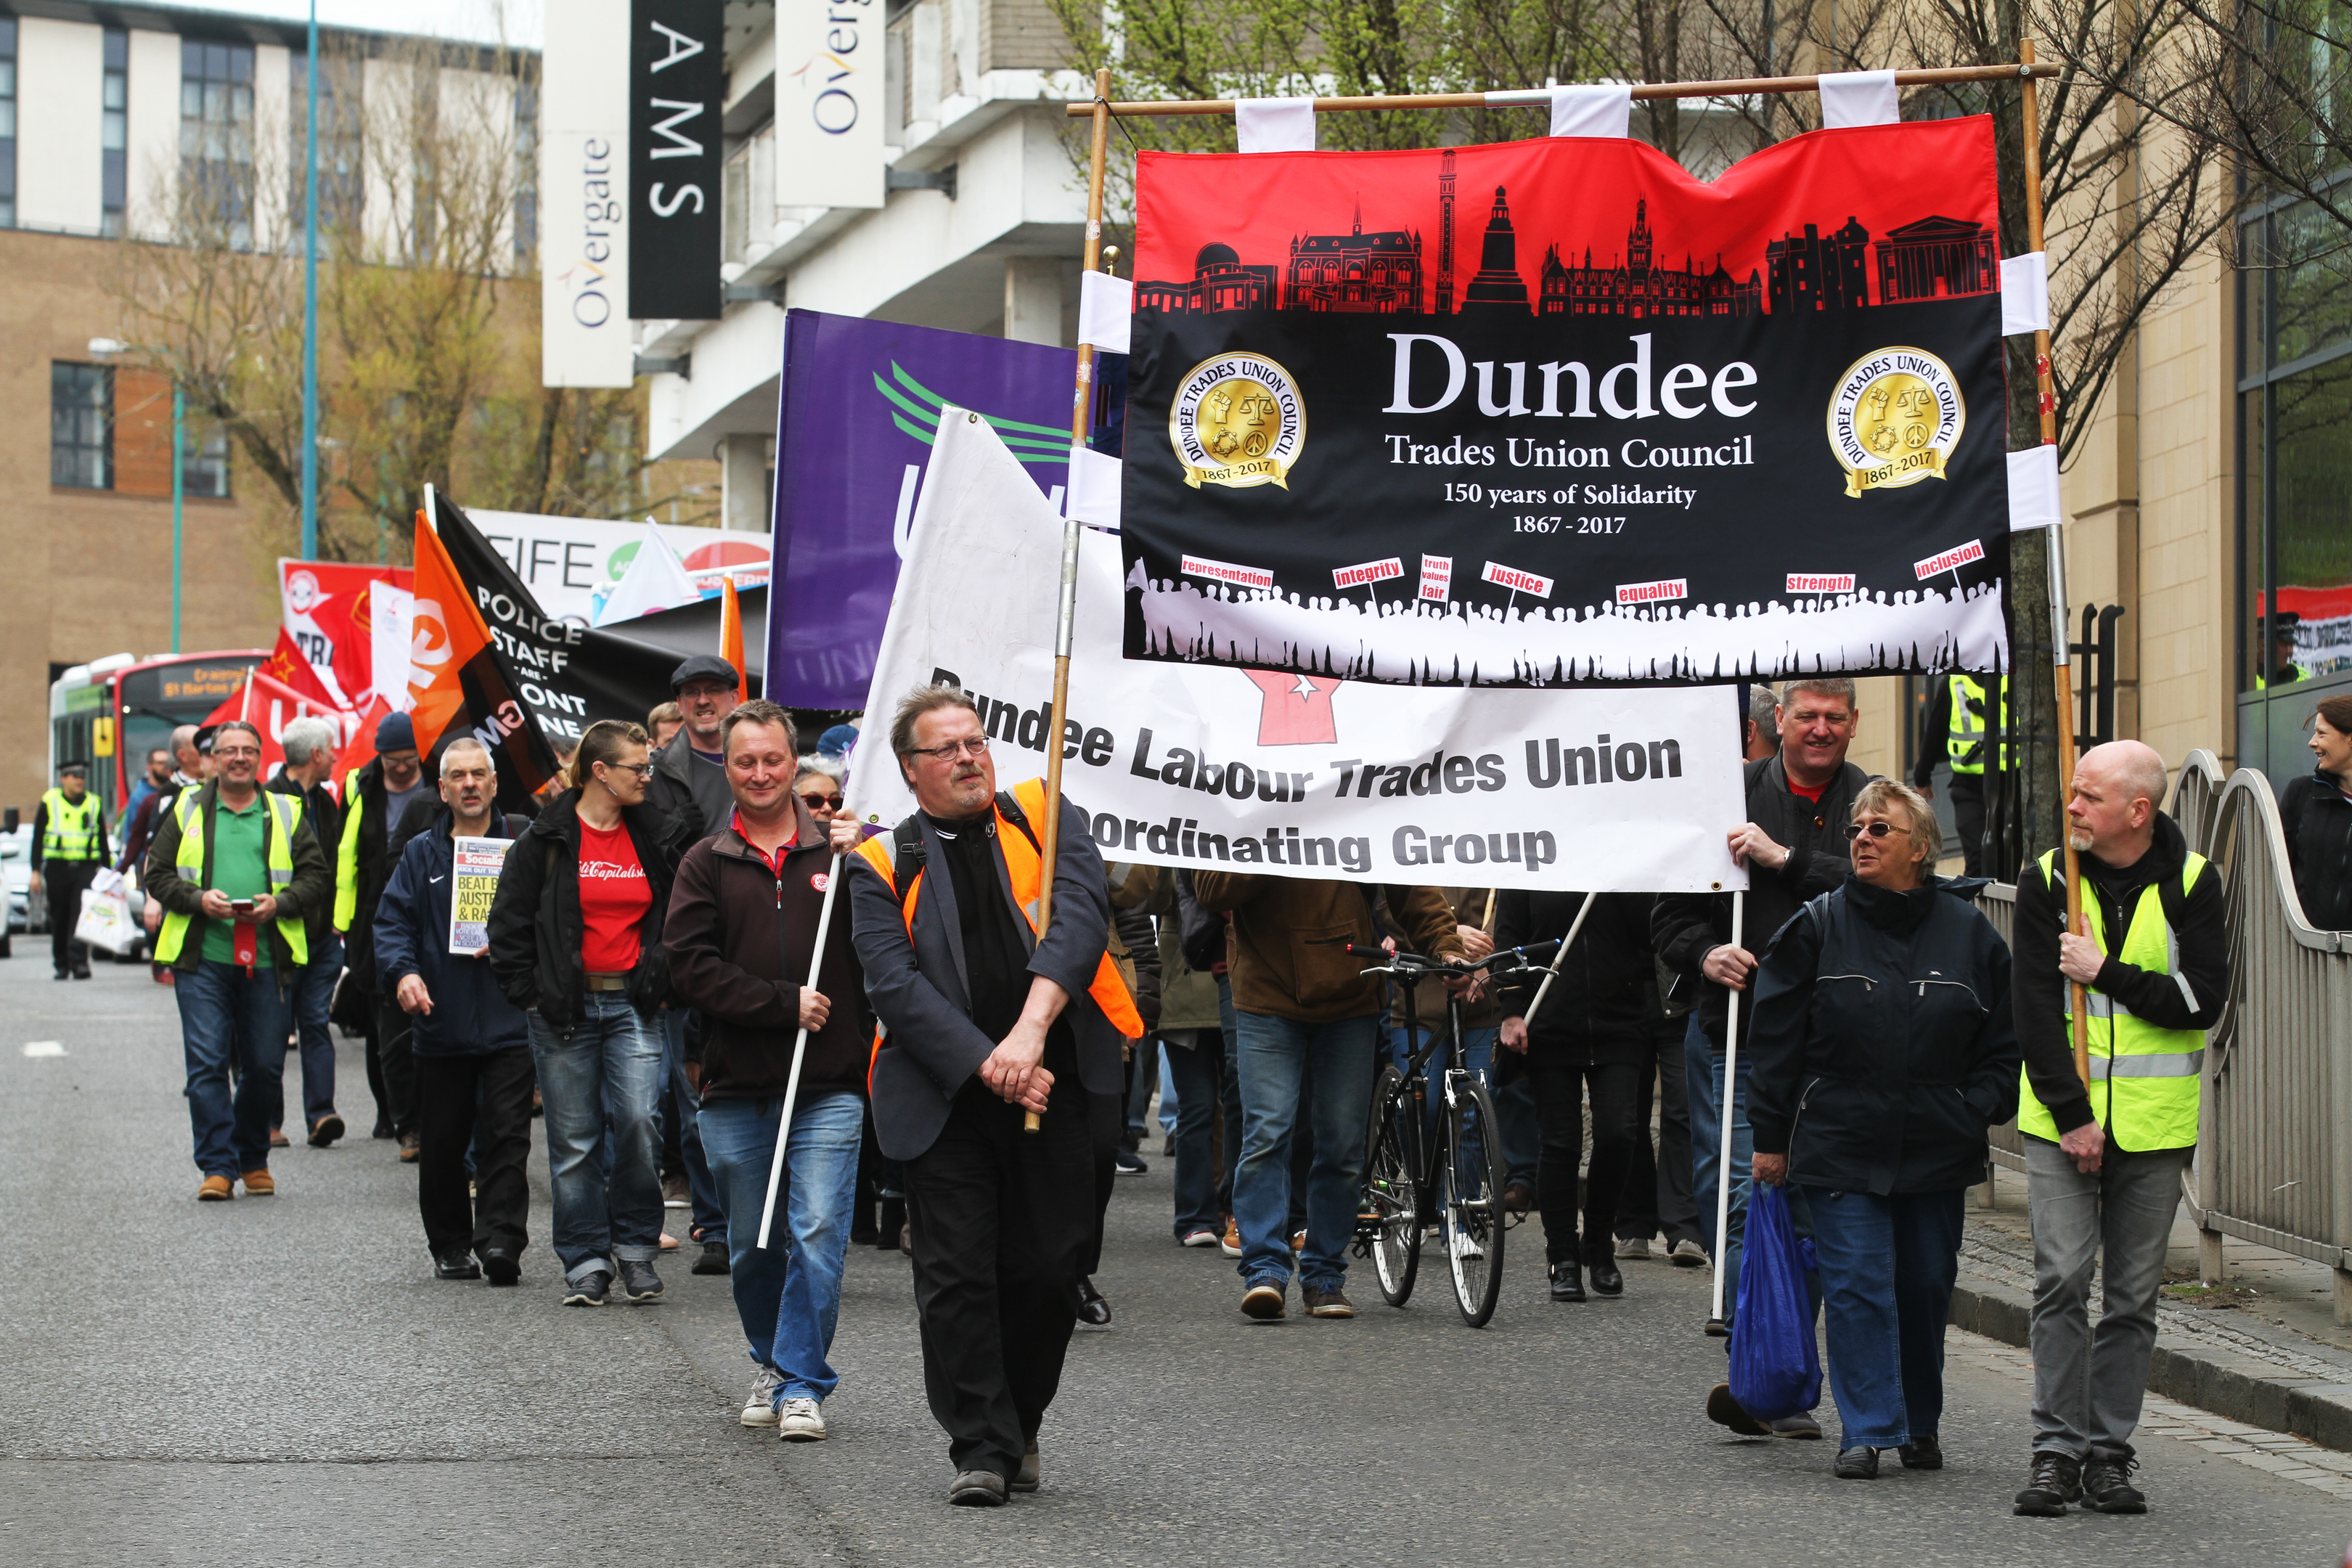 Trade Unions marching through Dundee's city centre at a recent event.